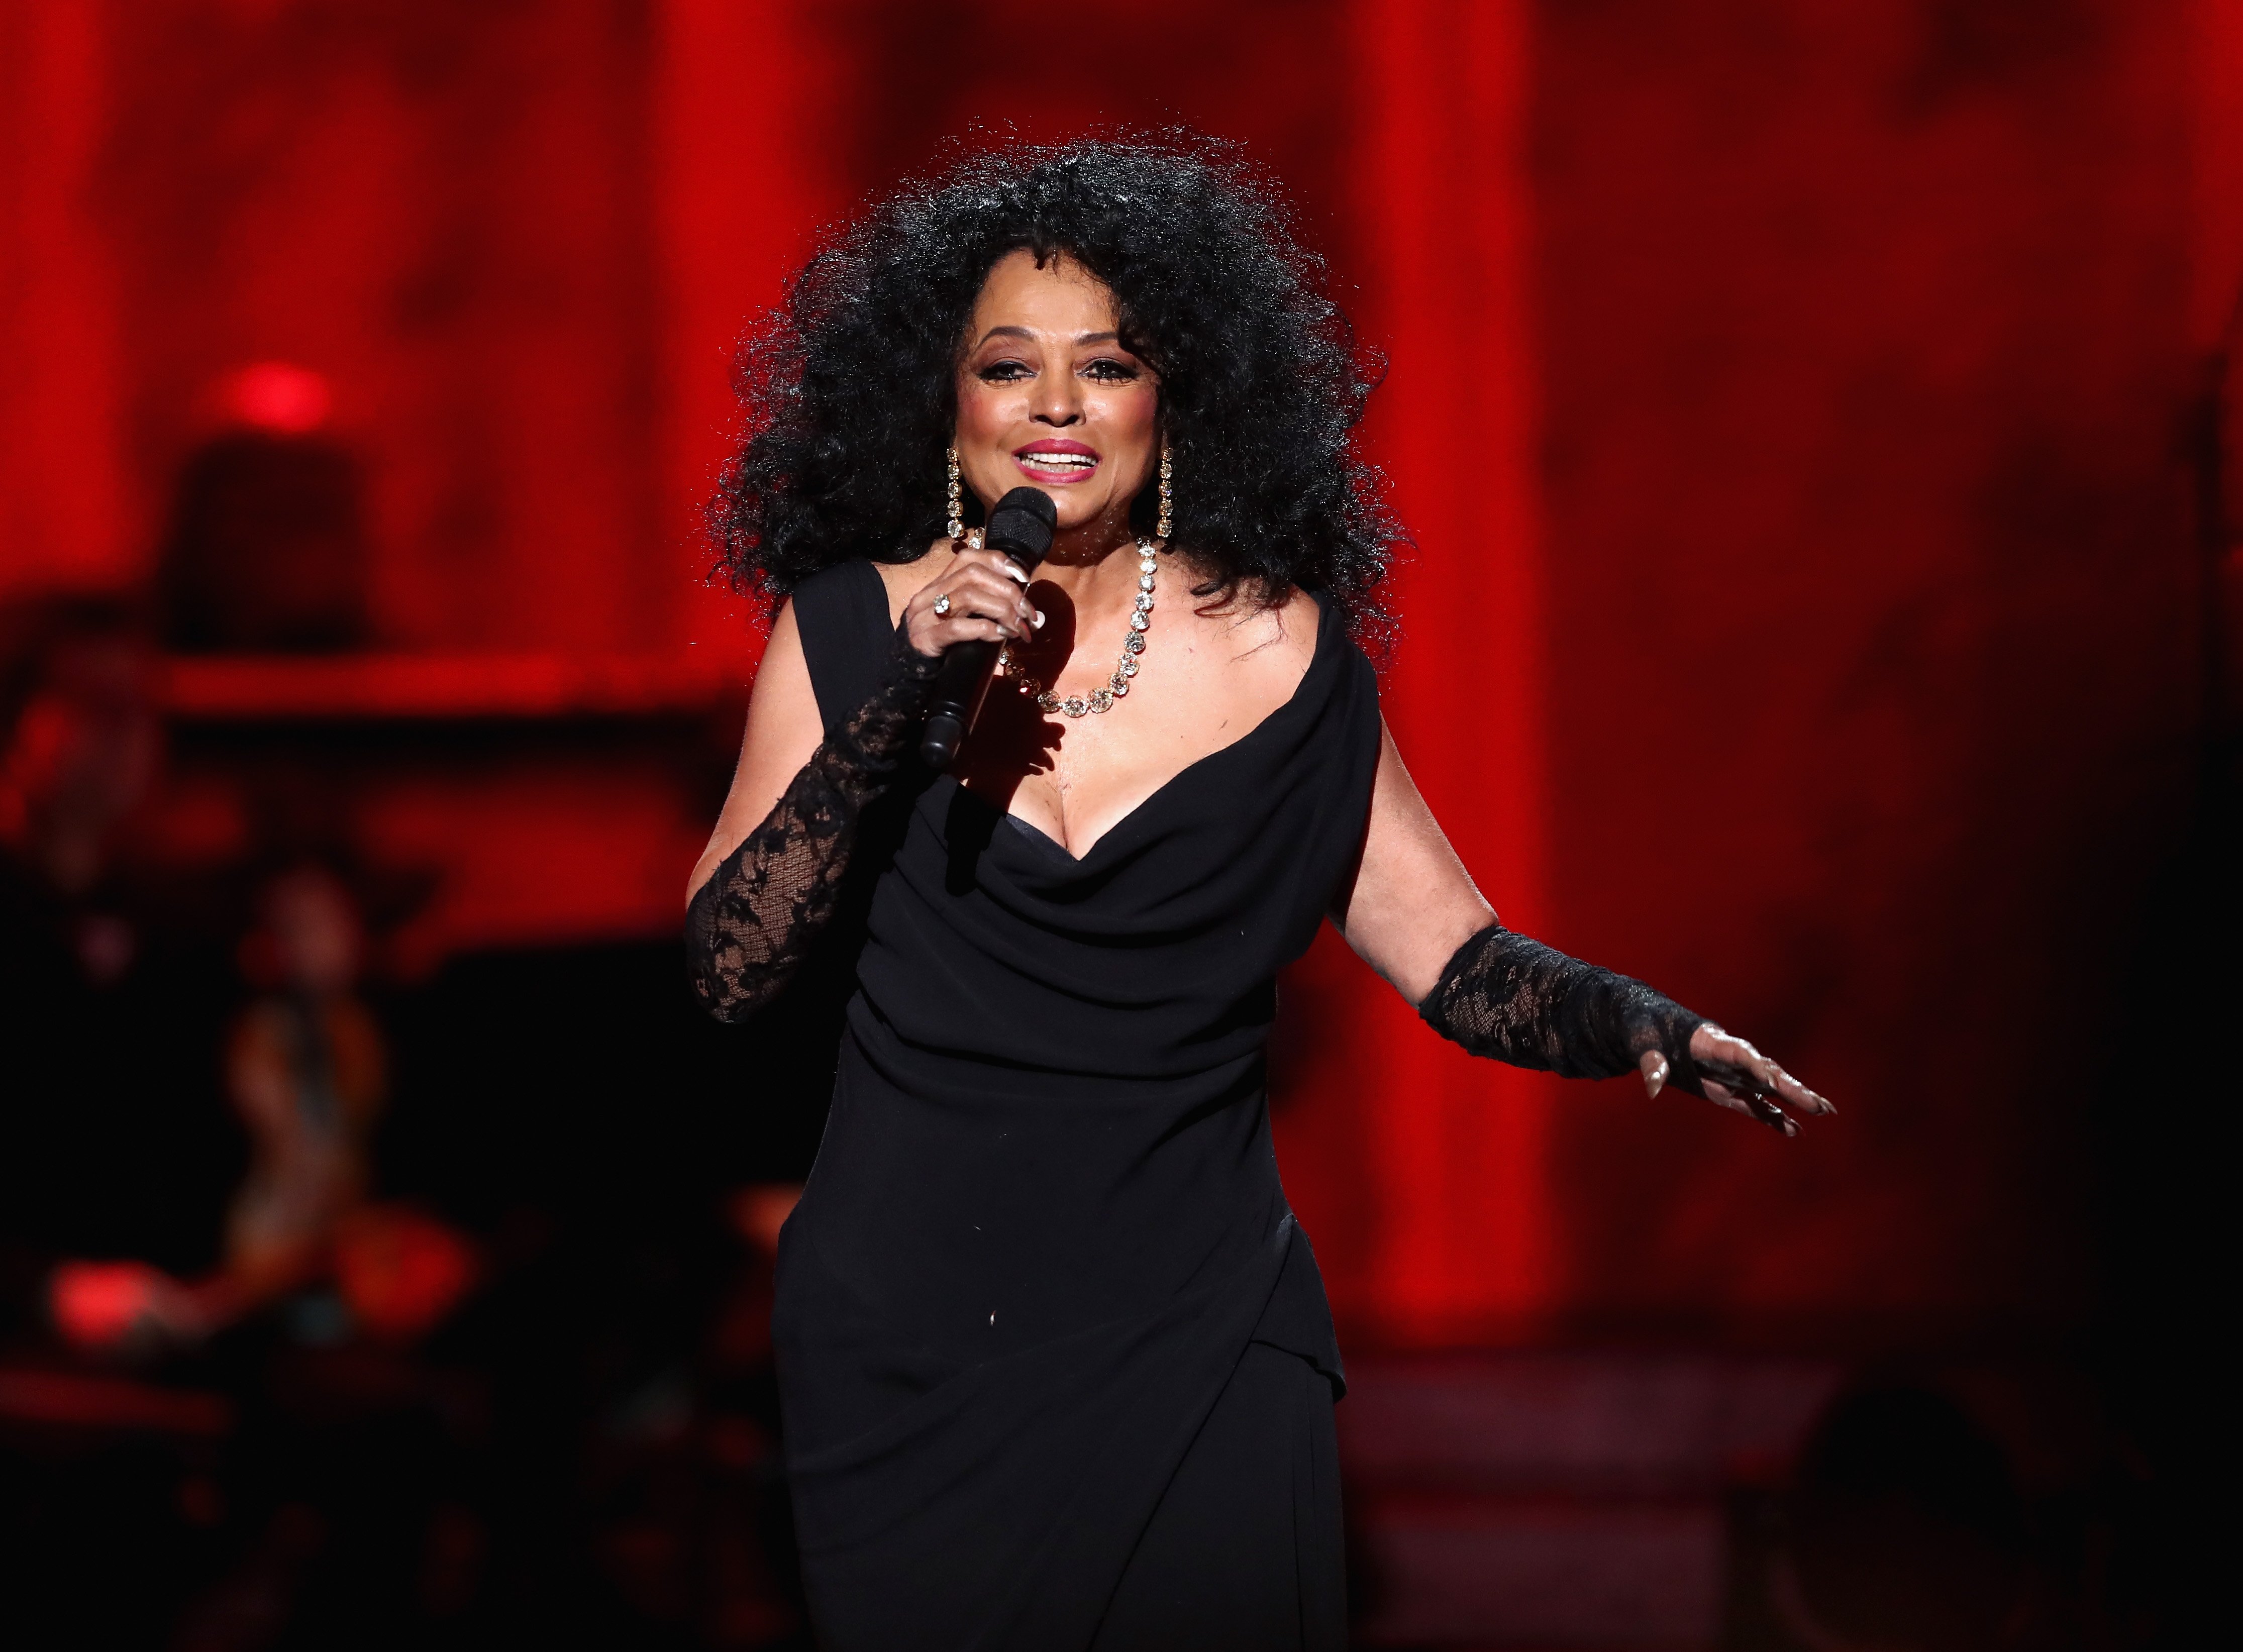 Diana Ross onstage at the "Motown 60: A Grammy Celebration" on February 12, 2019. | Photo: Getty Images